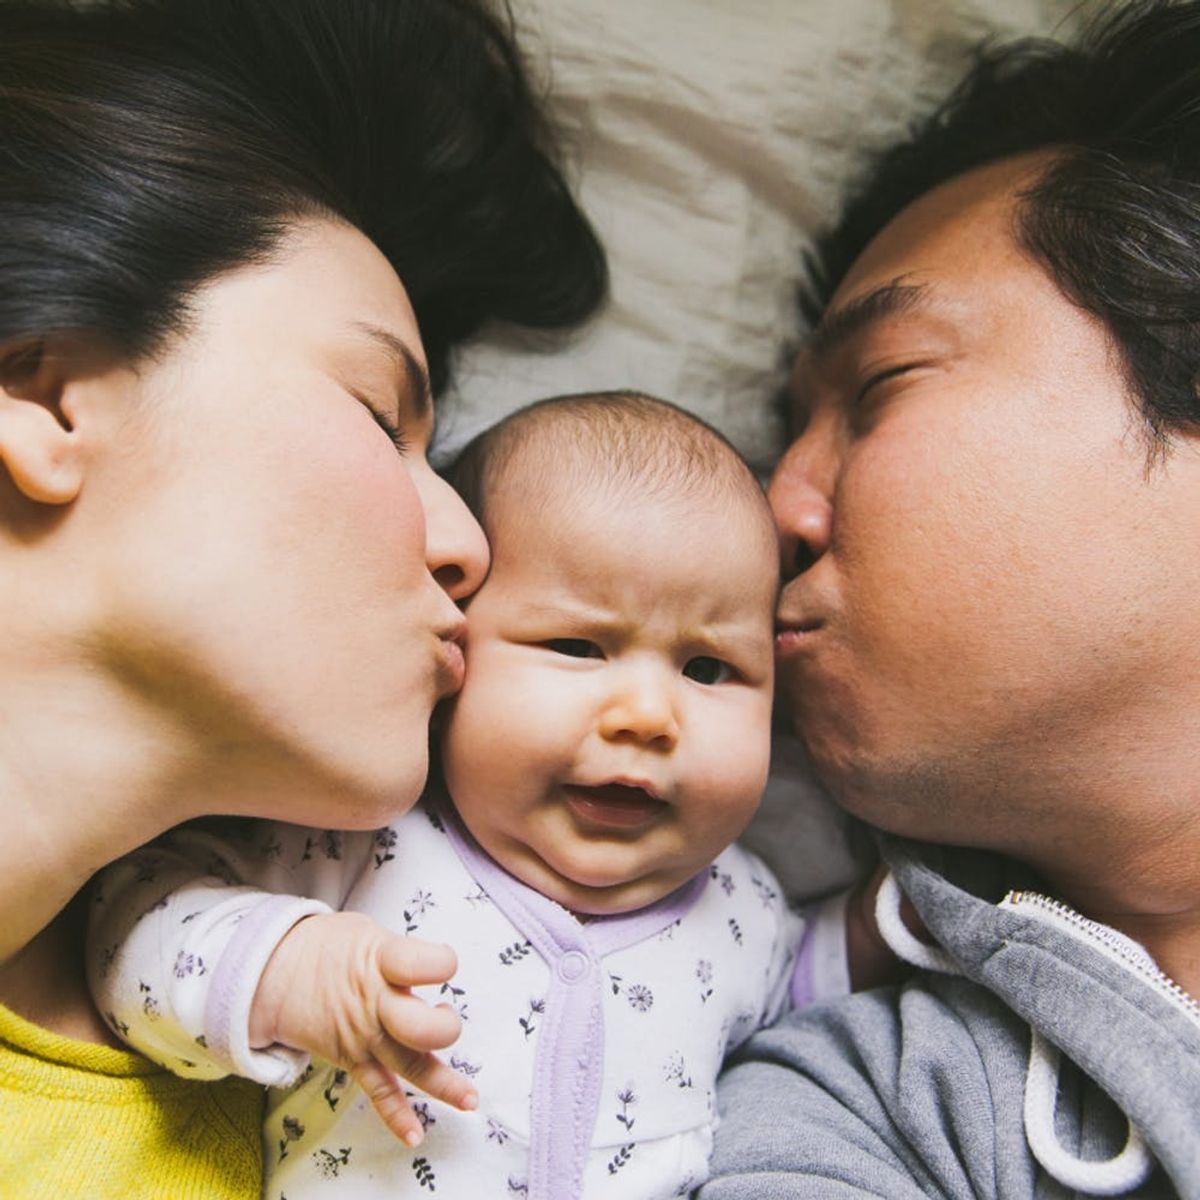 5 Smart Legal and Financial Tips for New Parents